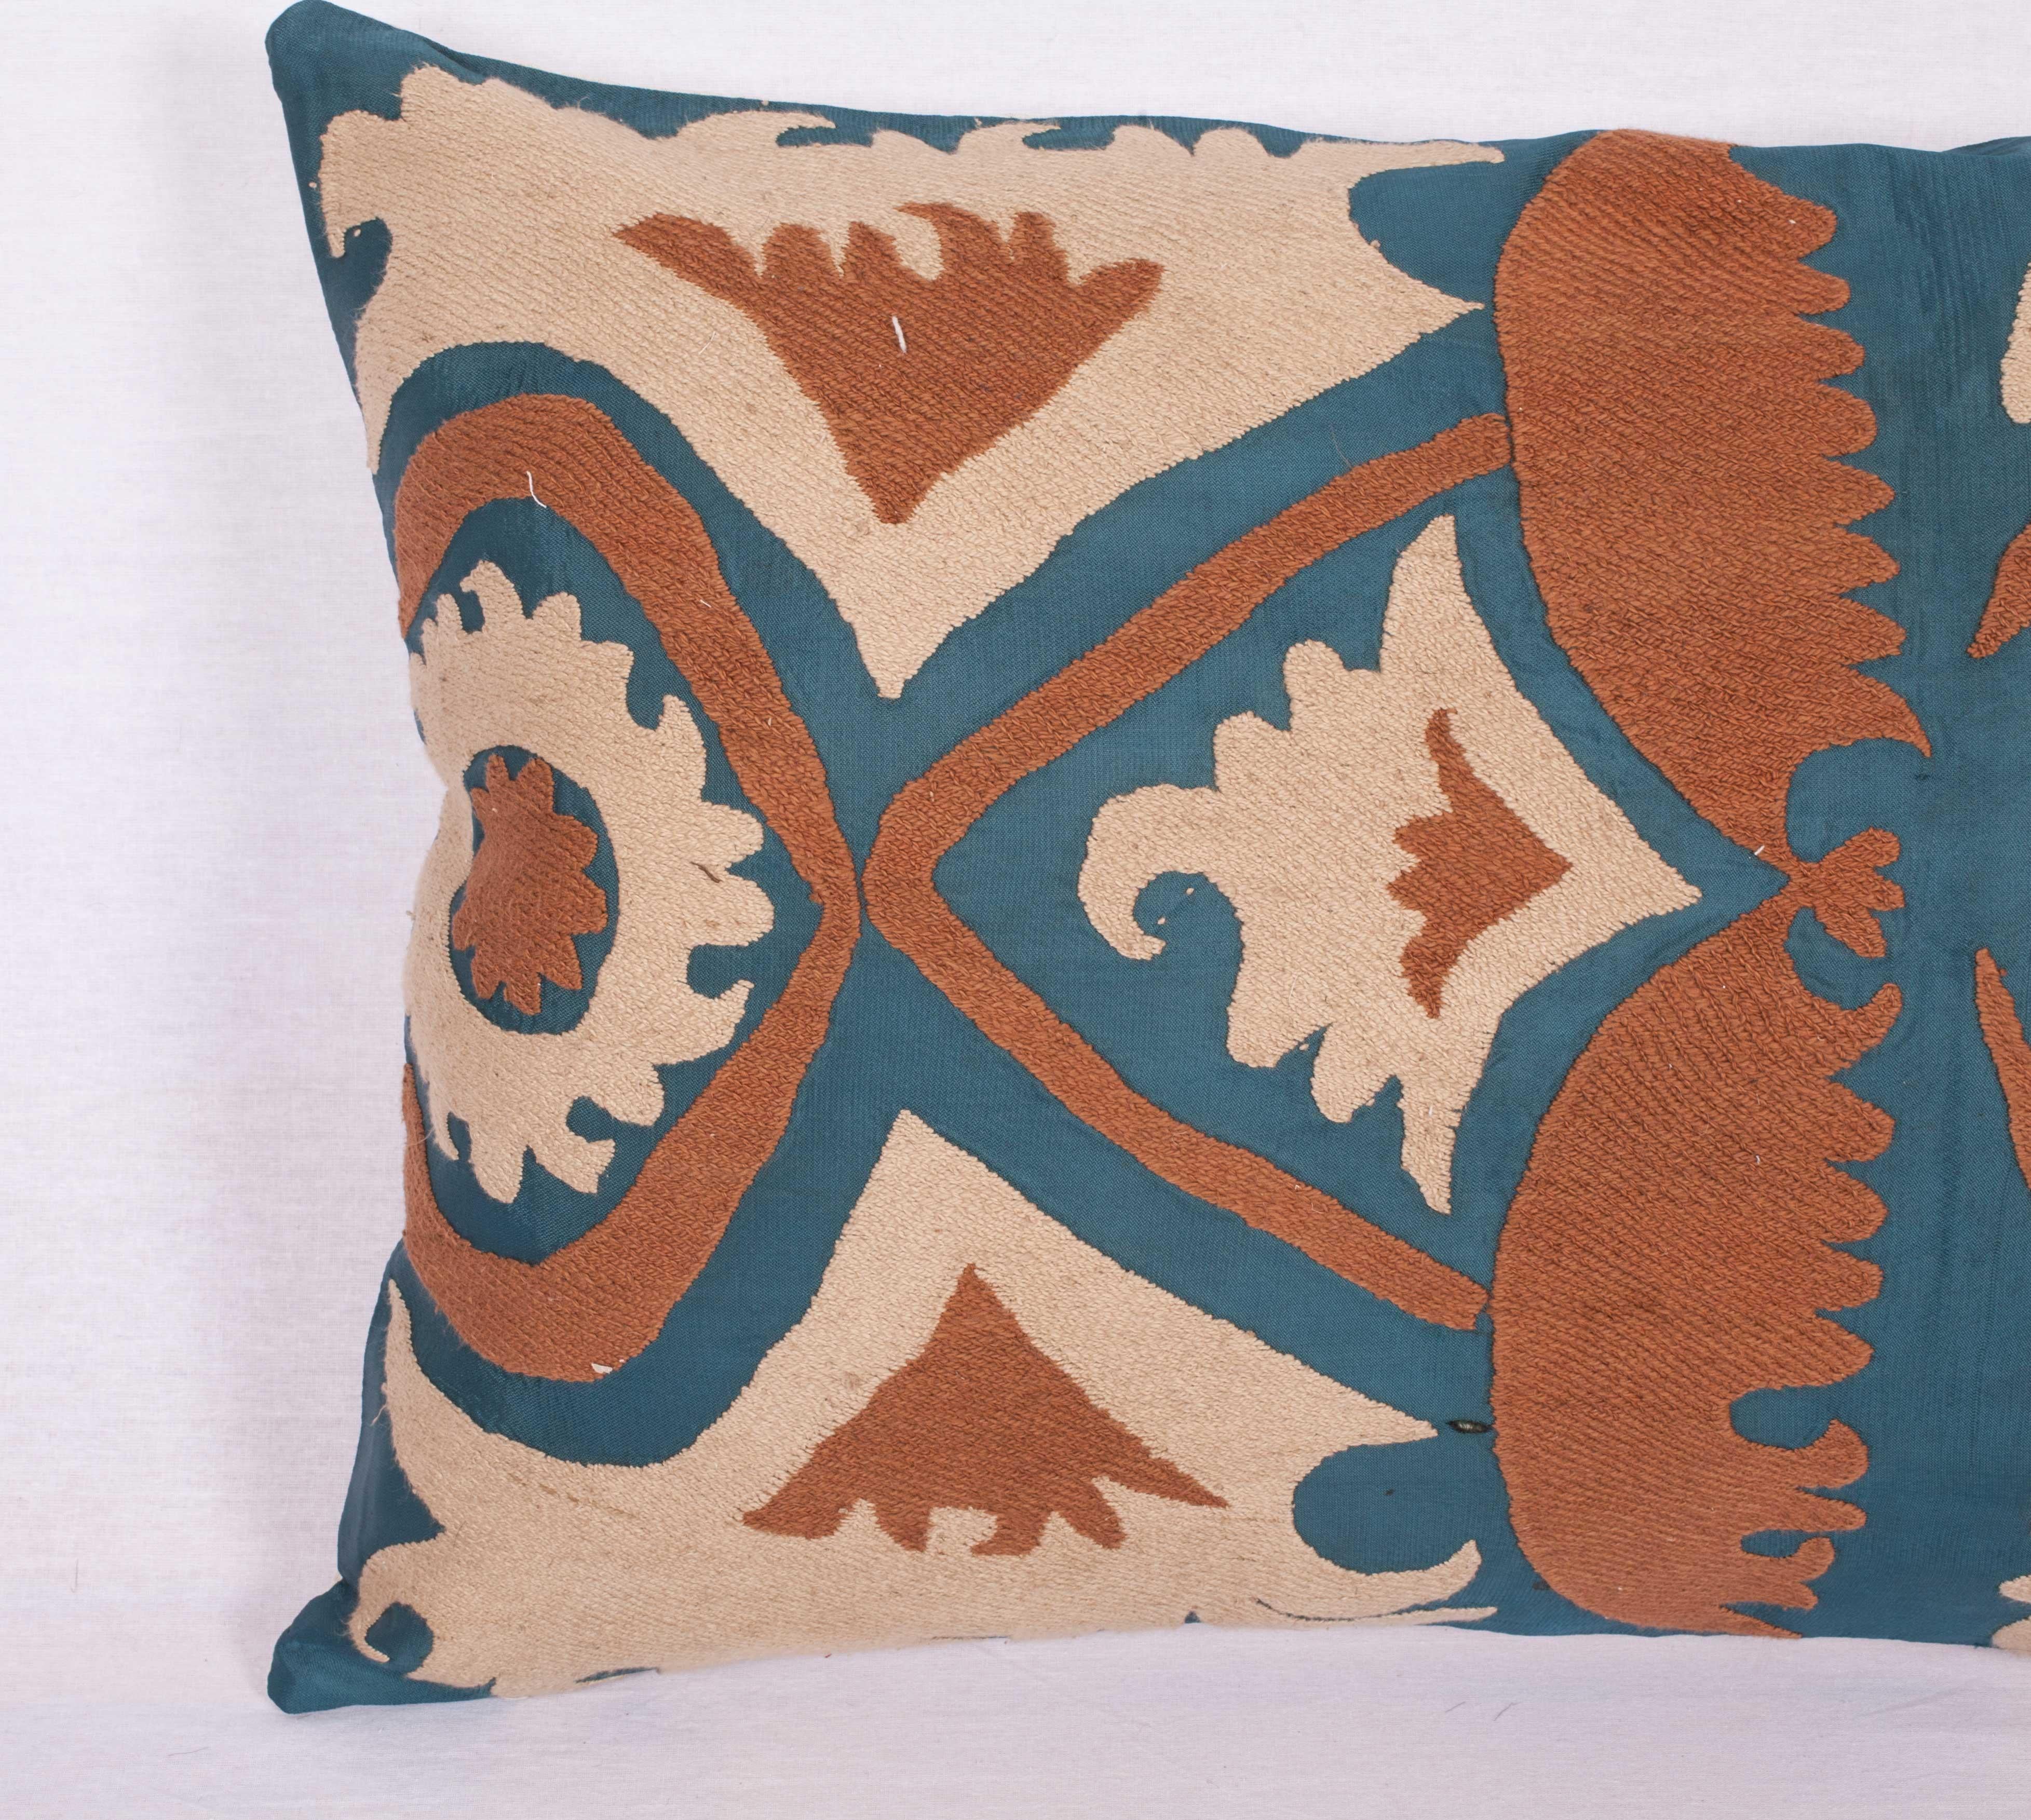 The pillow is made from a vintage Uzbek Samarkand Suzani. It does not come with an insert but comes with a bag made to the size and out of cotton to accommodate the filling. The backing is made of linen. Please note filling is not provided. Since